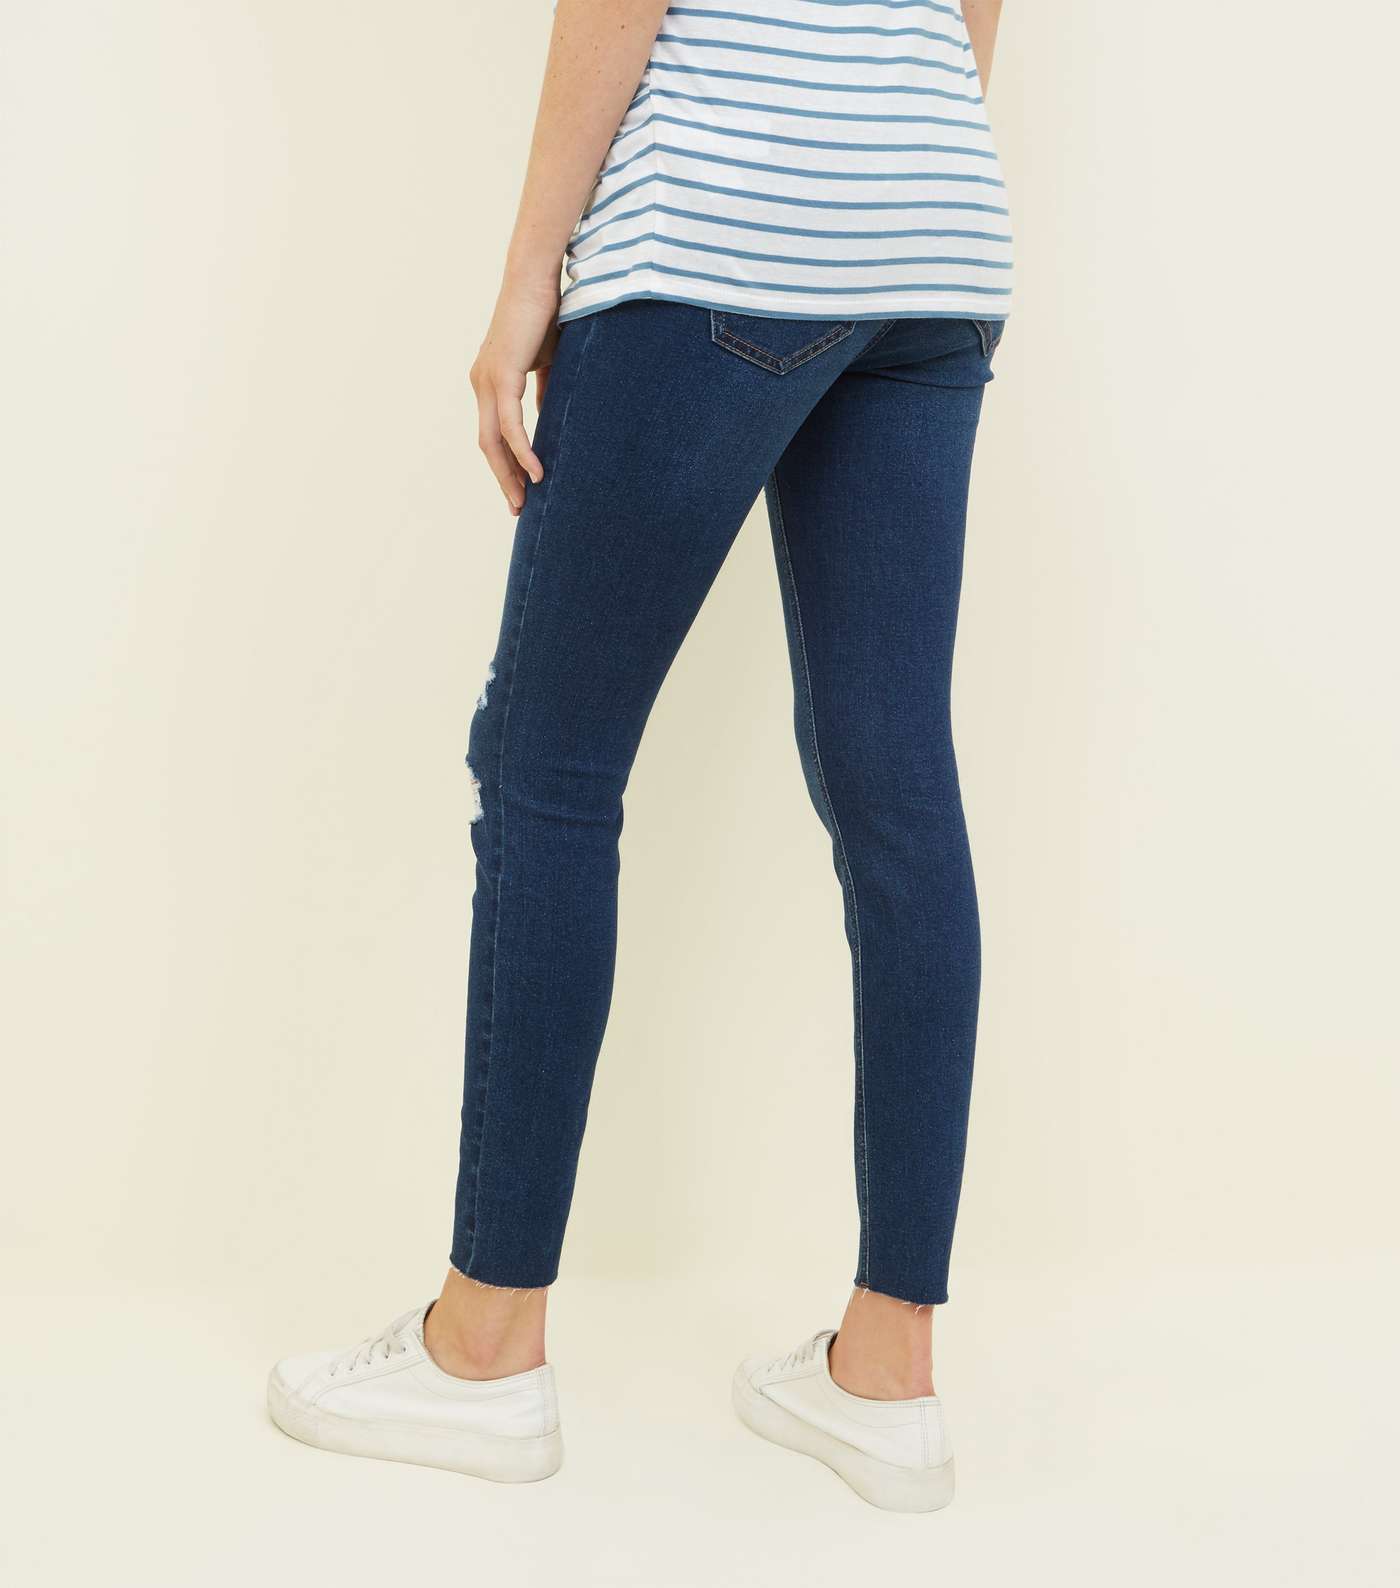 Maternity Navy Ripped Over Bump Skinny Jeans Image 3